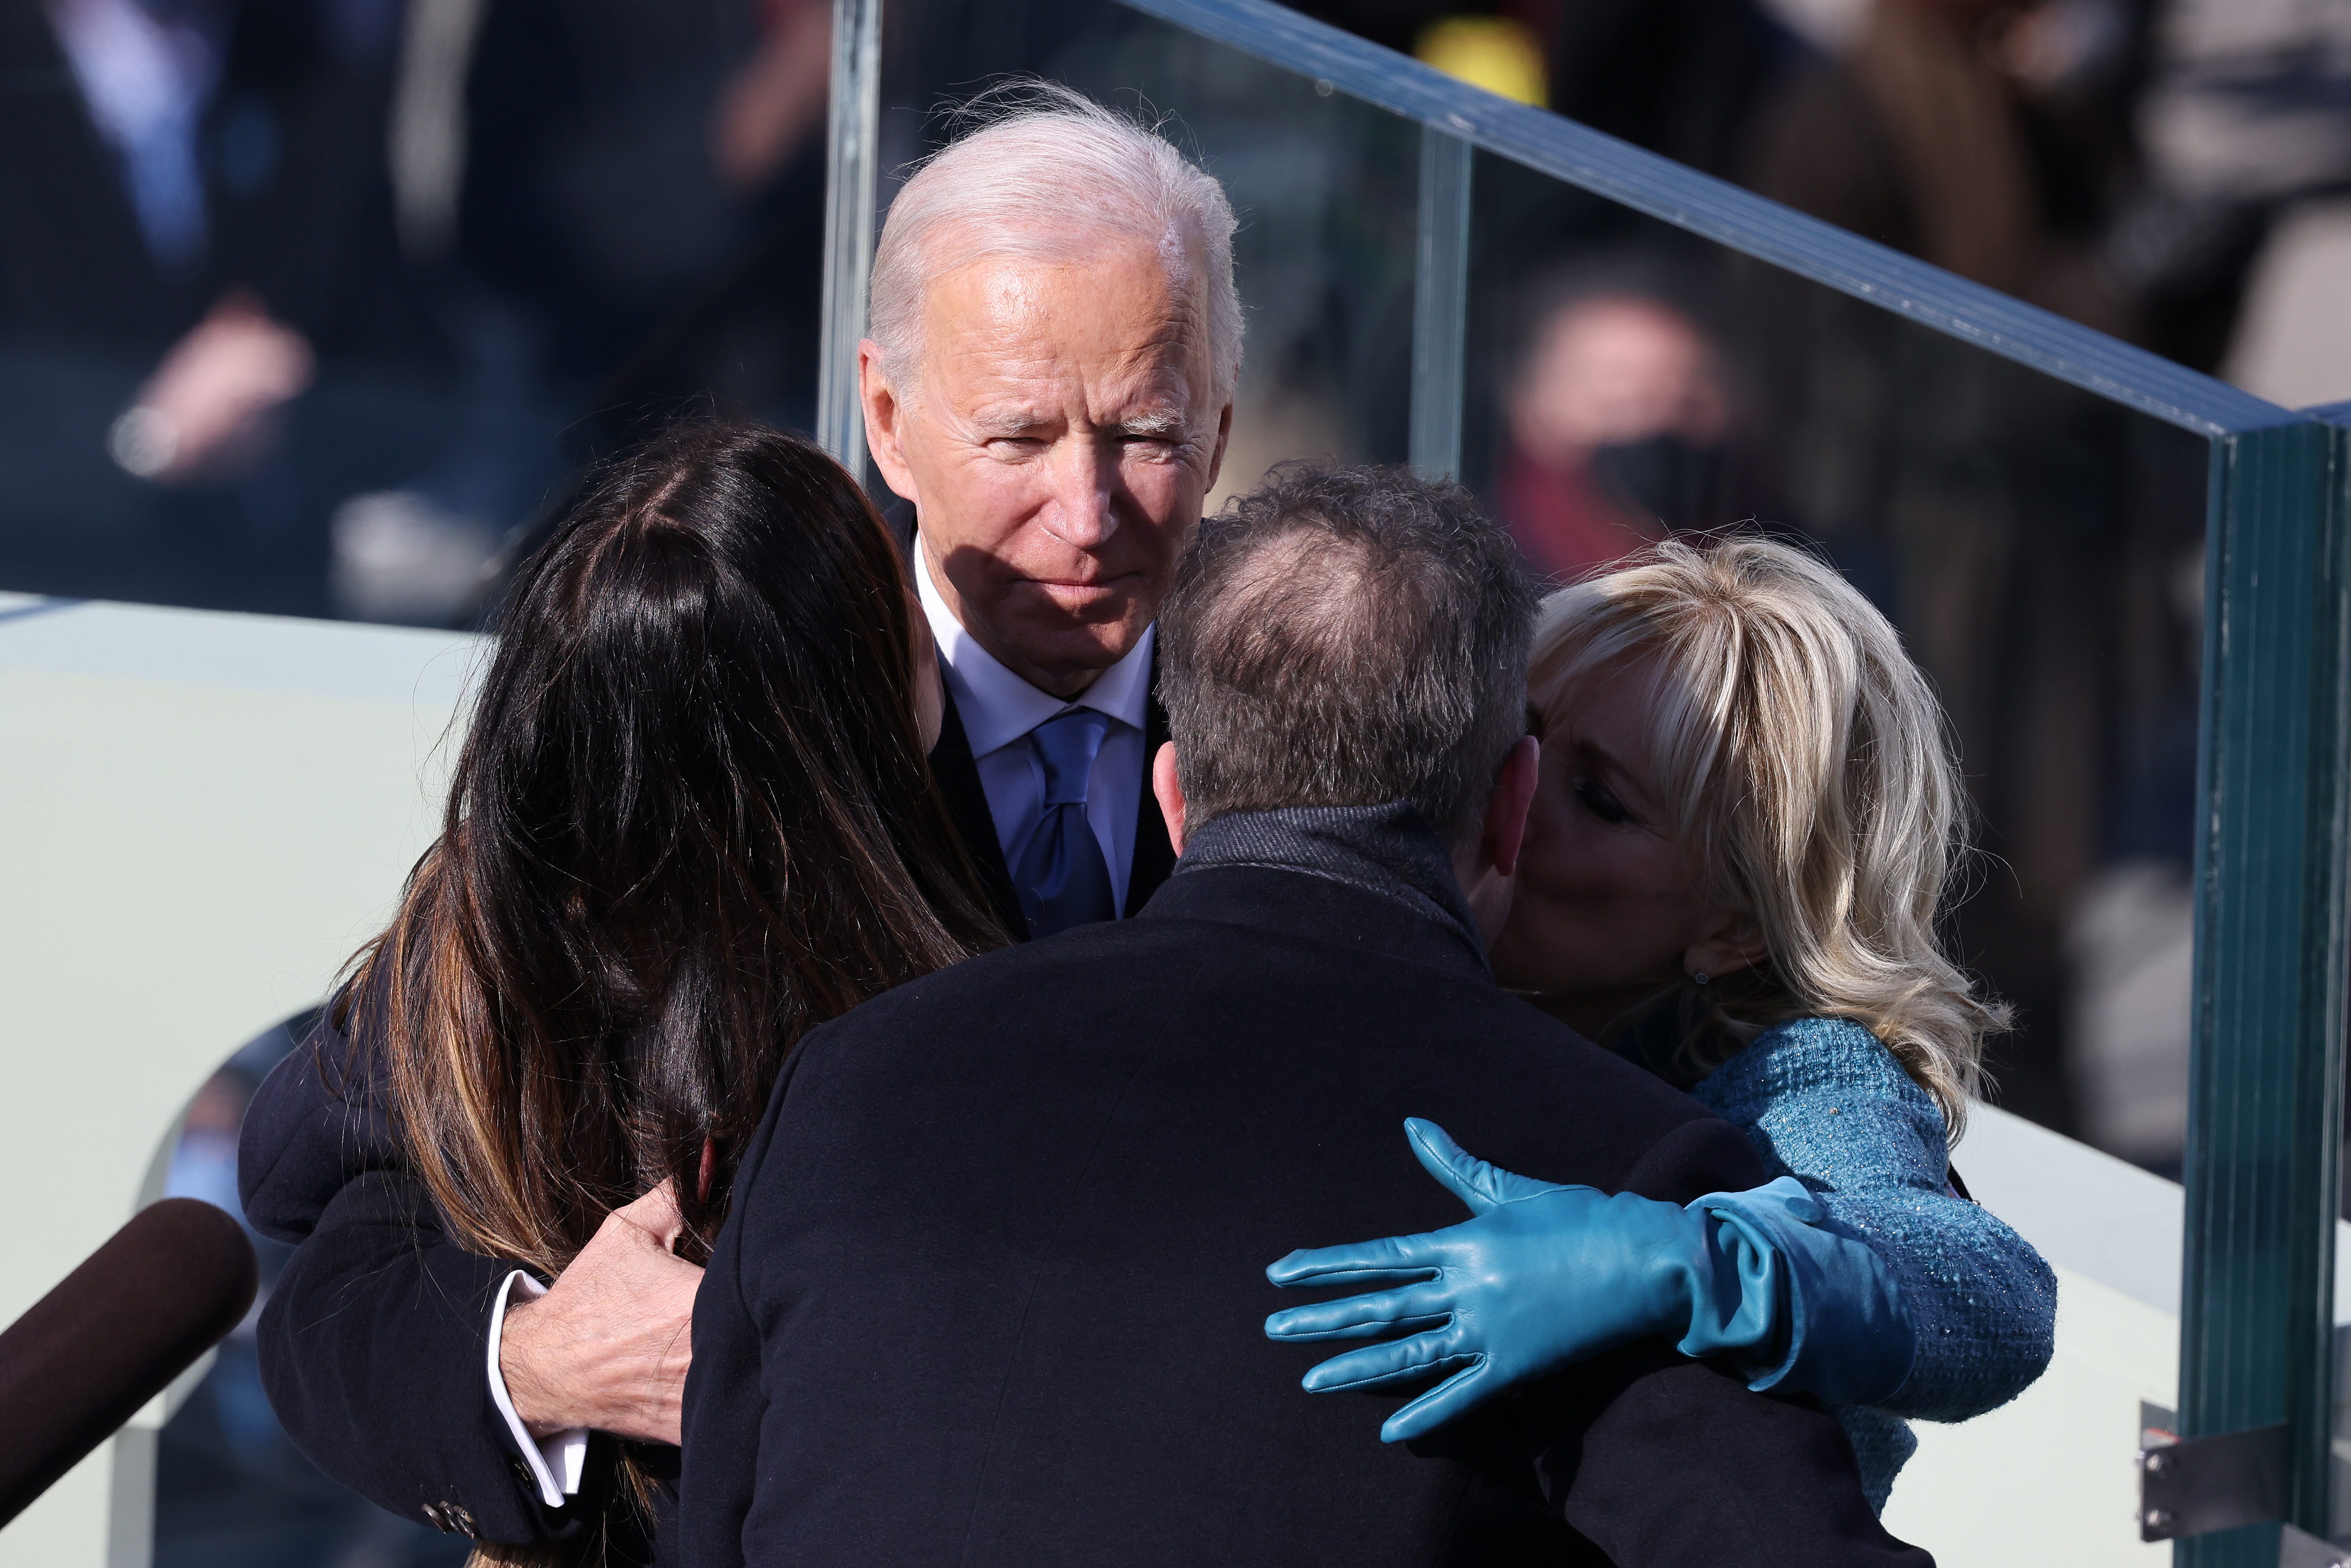 President Joe Biden and first lady Jill Biden hug Hunter Biden and daughter Ashley Biden after being sworn in as U.S. president during his inauguration on the West Front of the U.S. Capitol on January 20, 2021 in Washington, DC.  During today's inauguration ceremony Joe Biden becomes the 46th president of the United States.